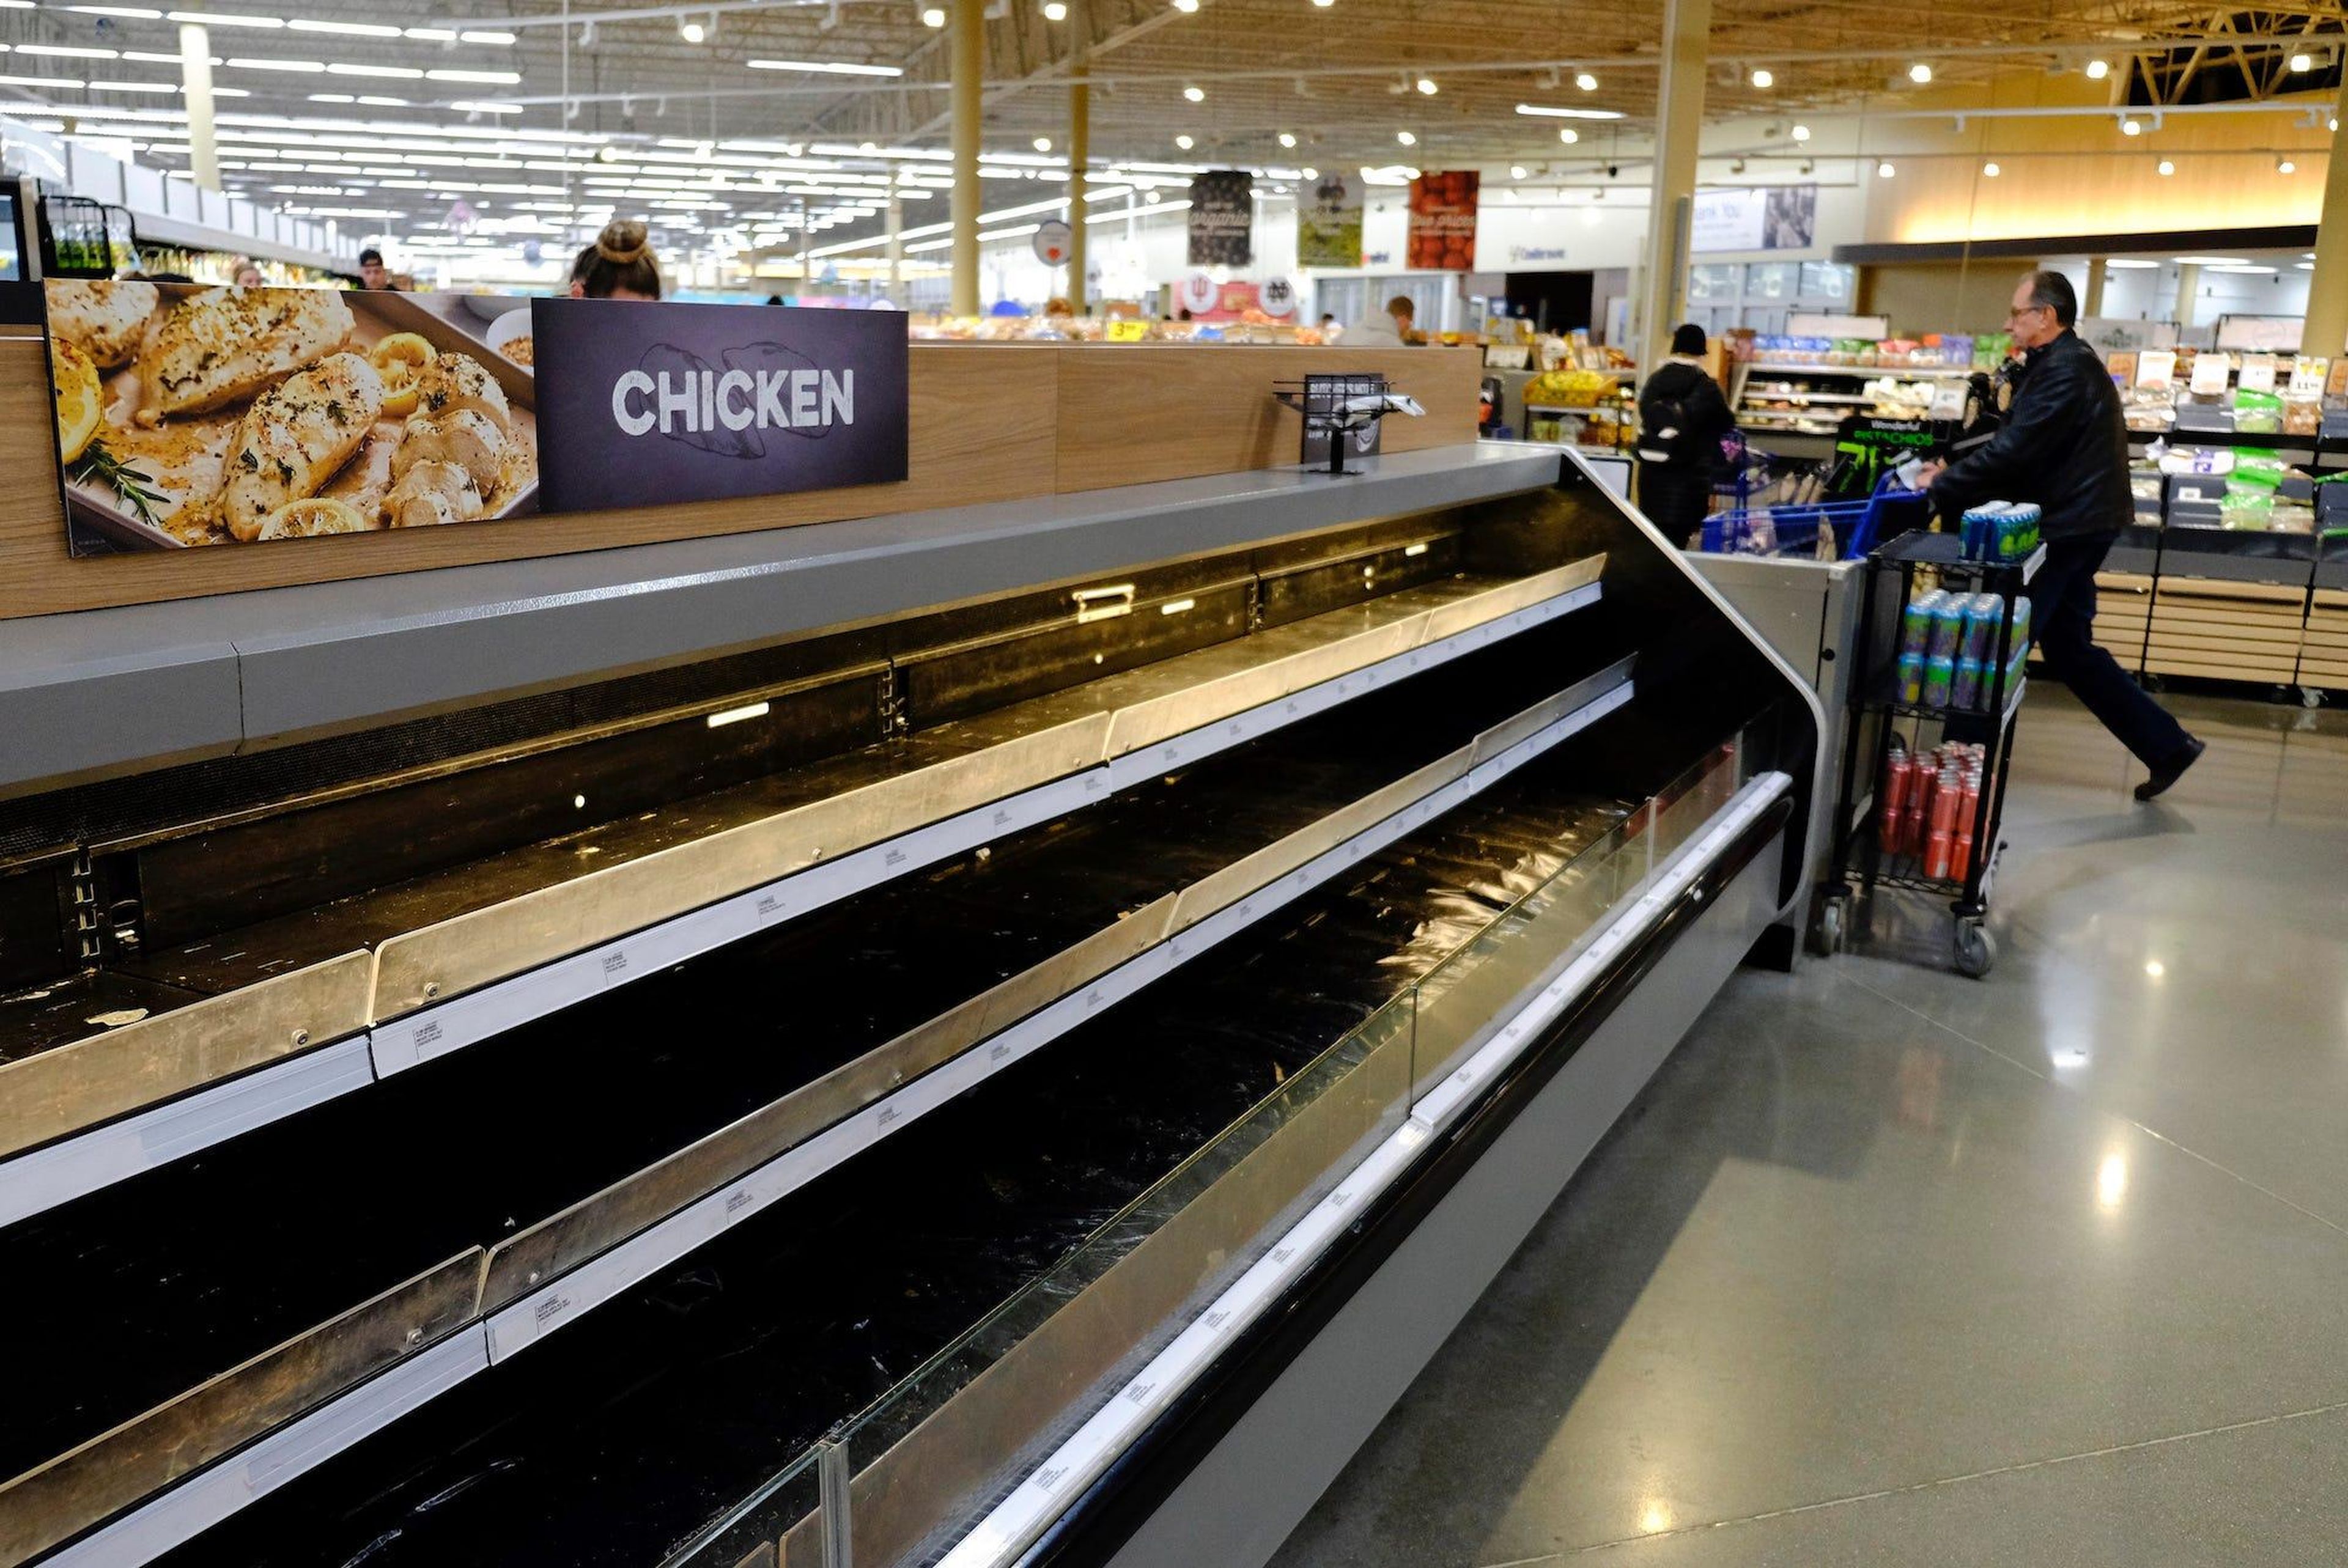 Empty shelves are seen at the Meijer store on Monday, March 16, 2020, in Whitestown, Indiana, amid the coronavirus outbreak.